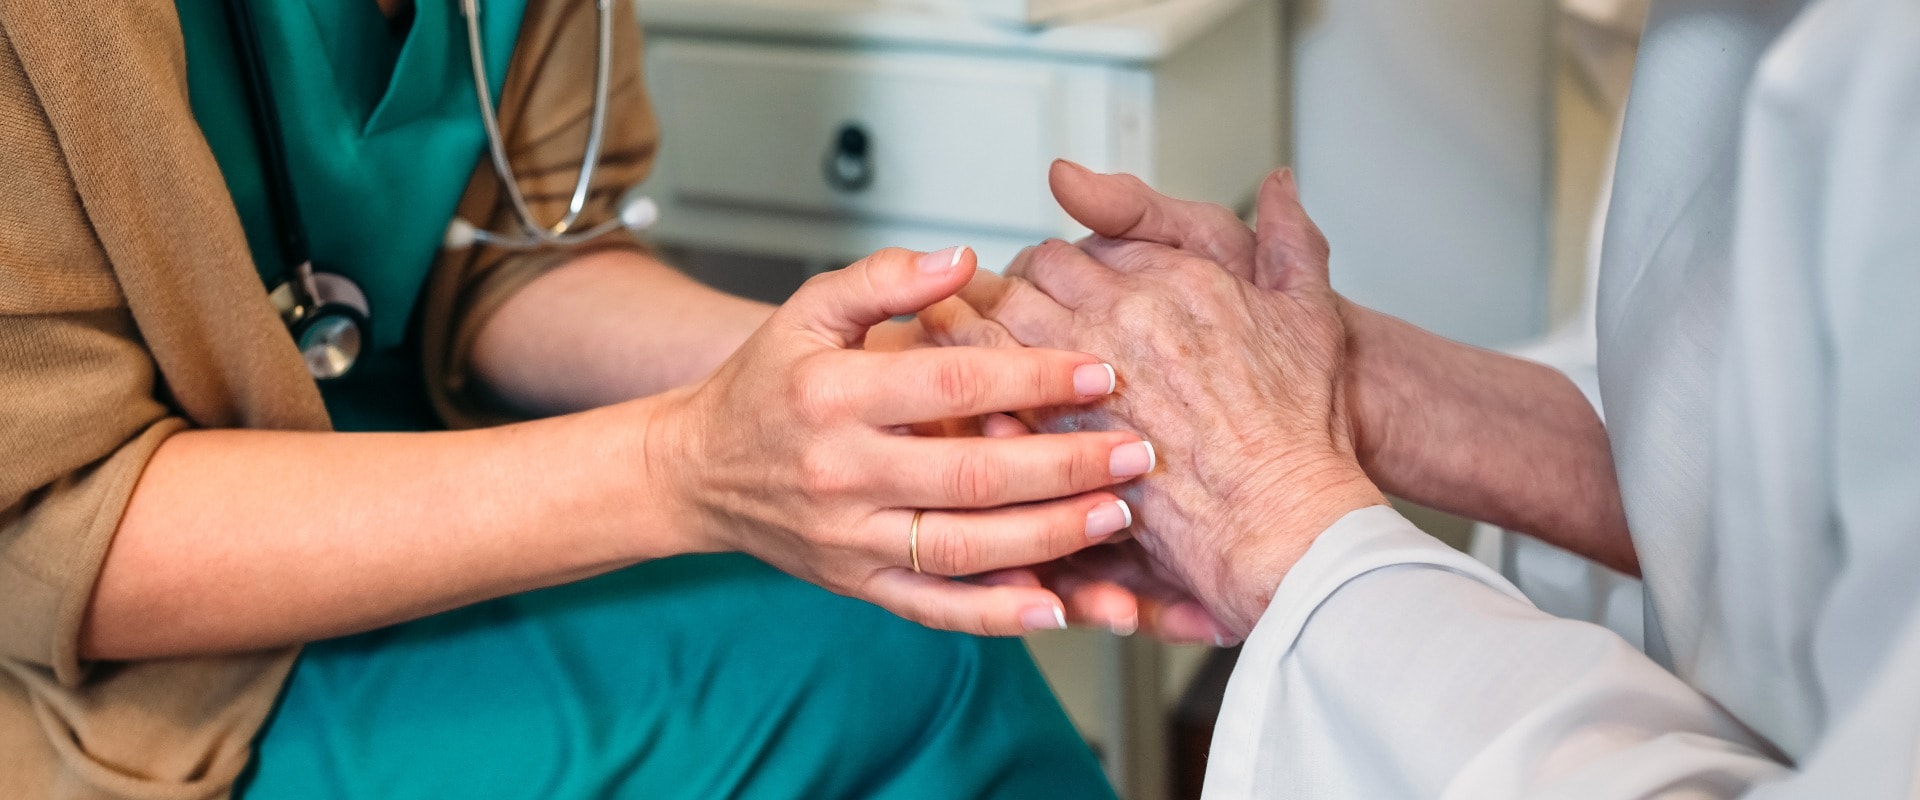 Female doctor giving encouragement to elderly patient by holding her hands